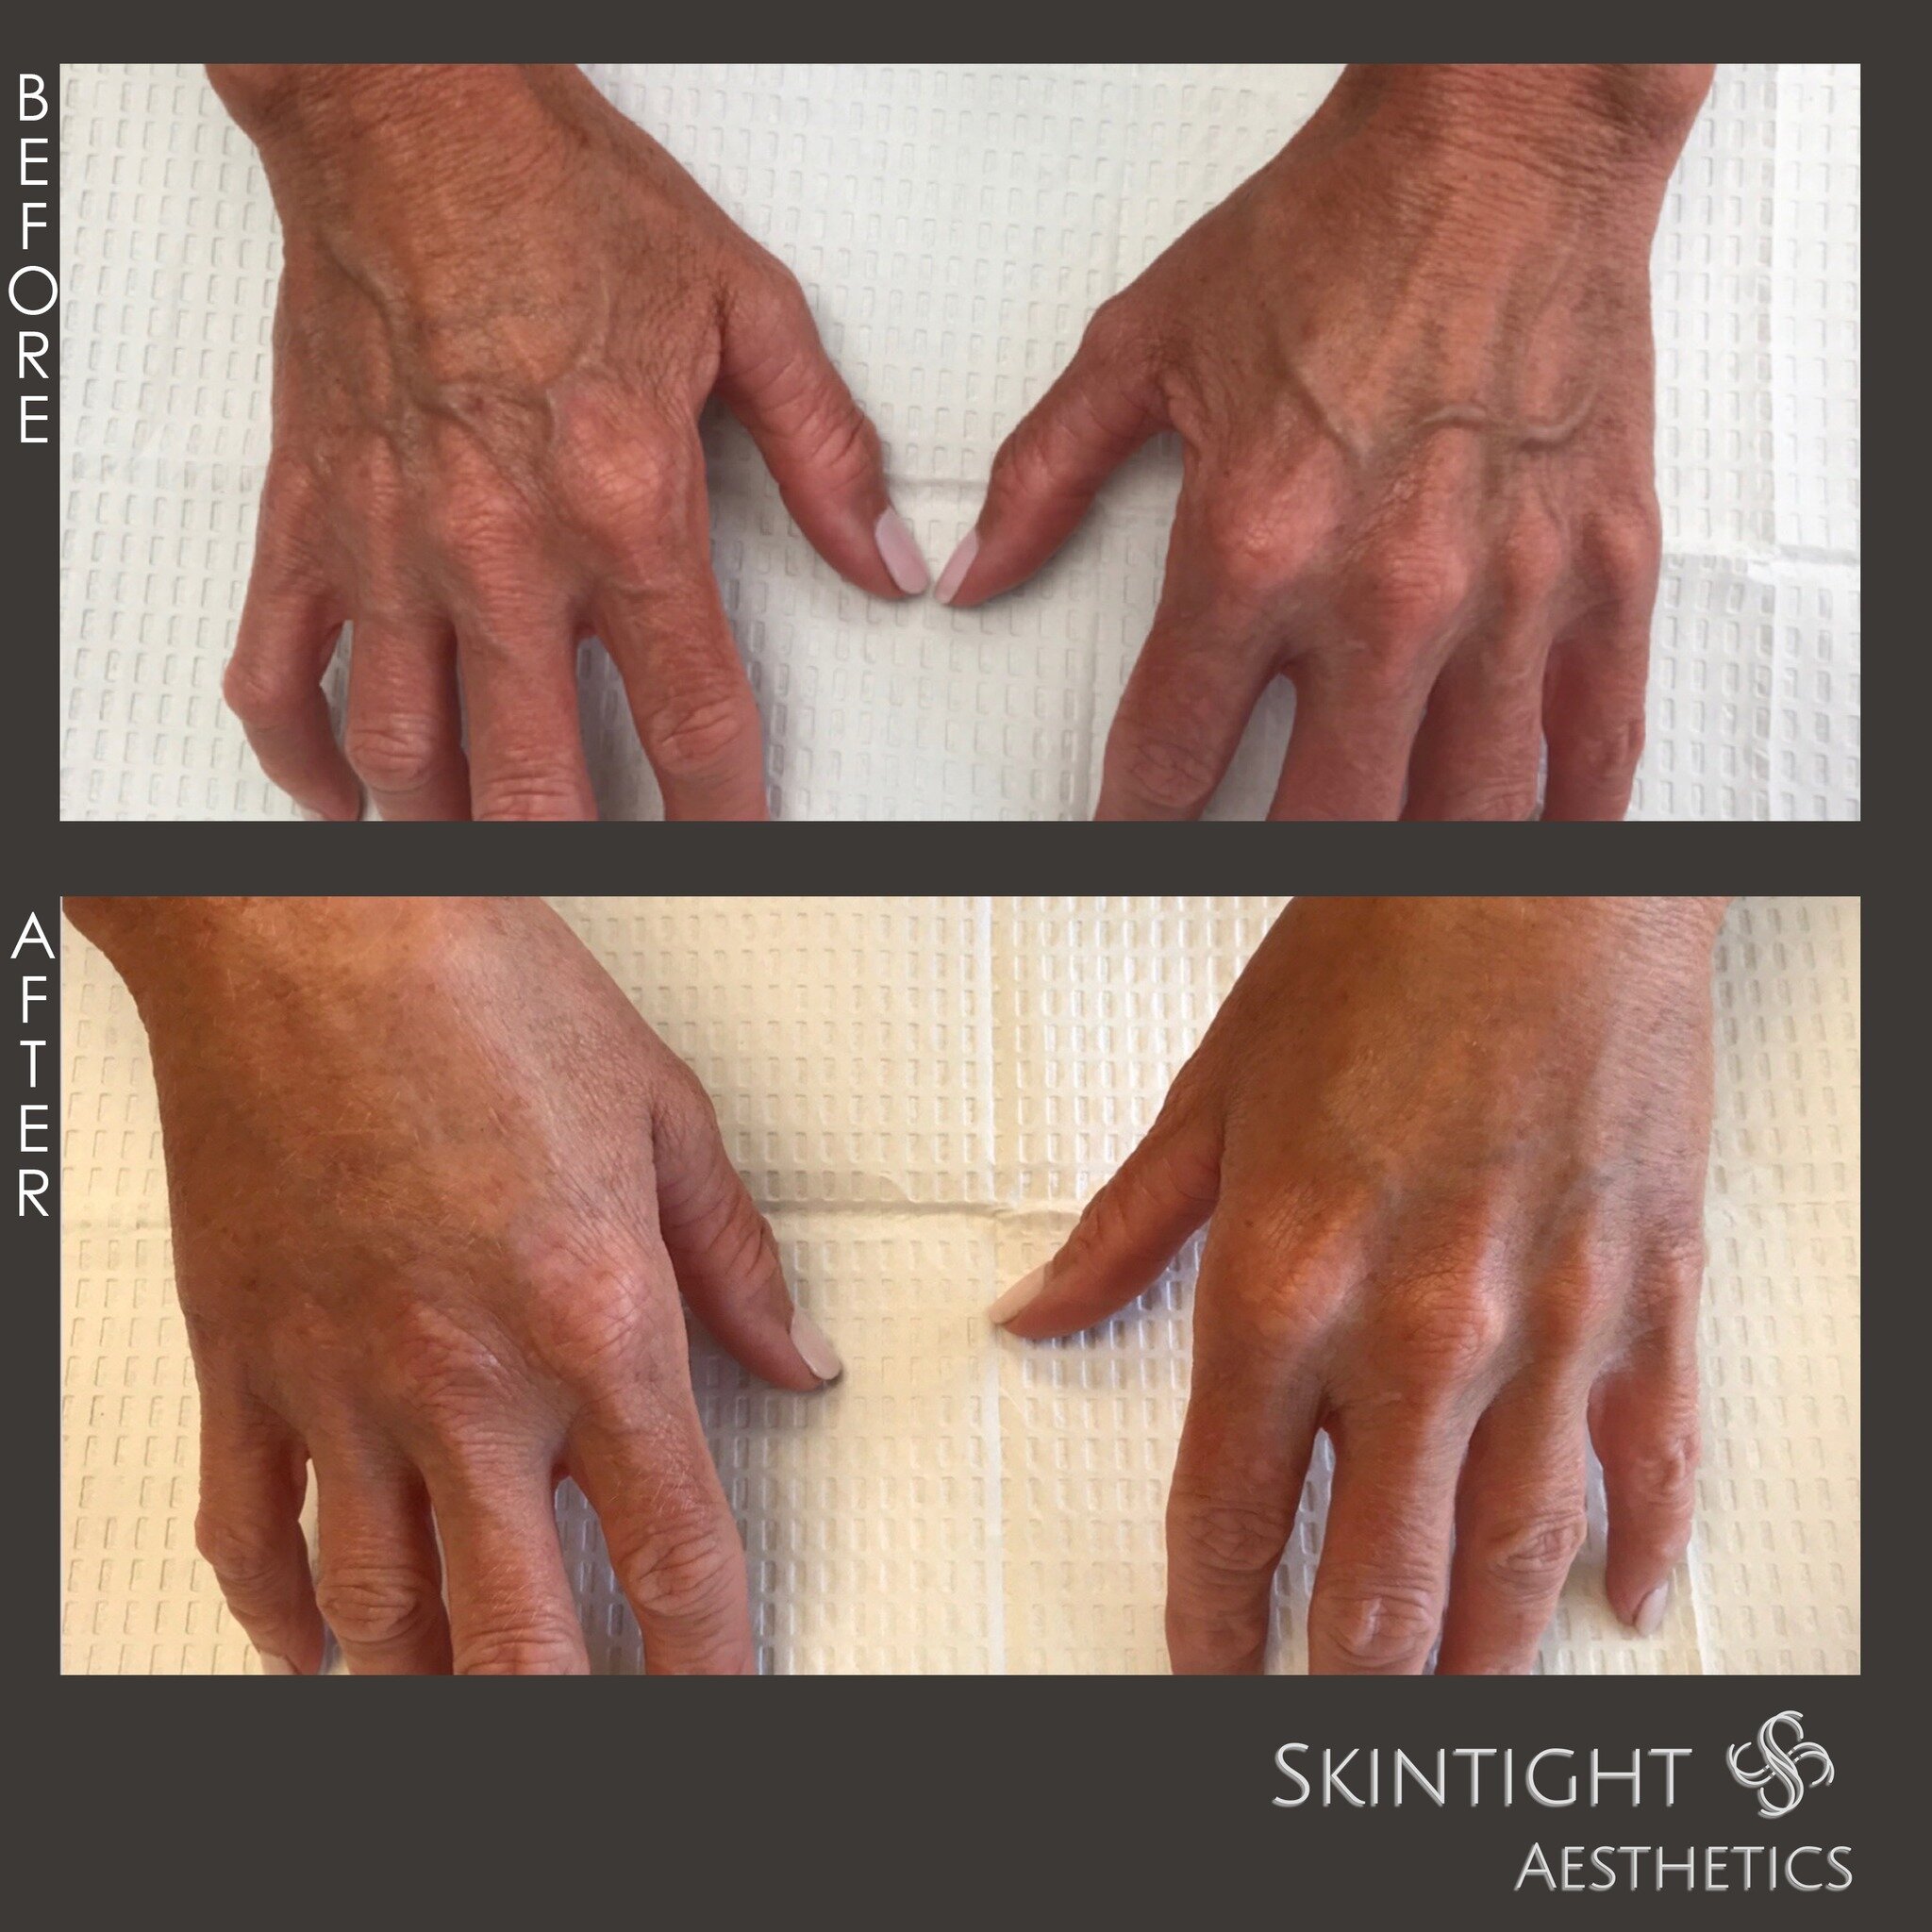 @leighgodfrey1 took decades off these hands! 😍

💉 Treatment: Hand Filler with Radiesse
💵 Price: $850 per Syringe (note: Skintight only charges for the amount used)
⏰ Time: 30 Minutes
🙌🏼 Results: Immediate
🛌 Recovery: Up to 2 Weeks for Swelling 